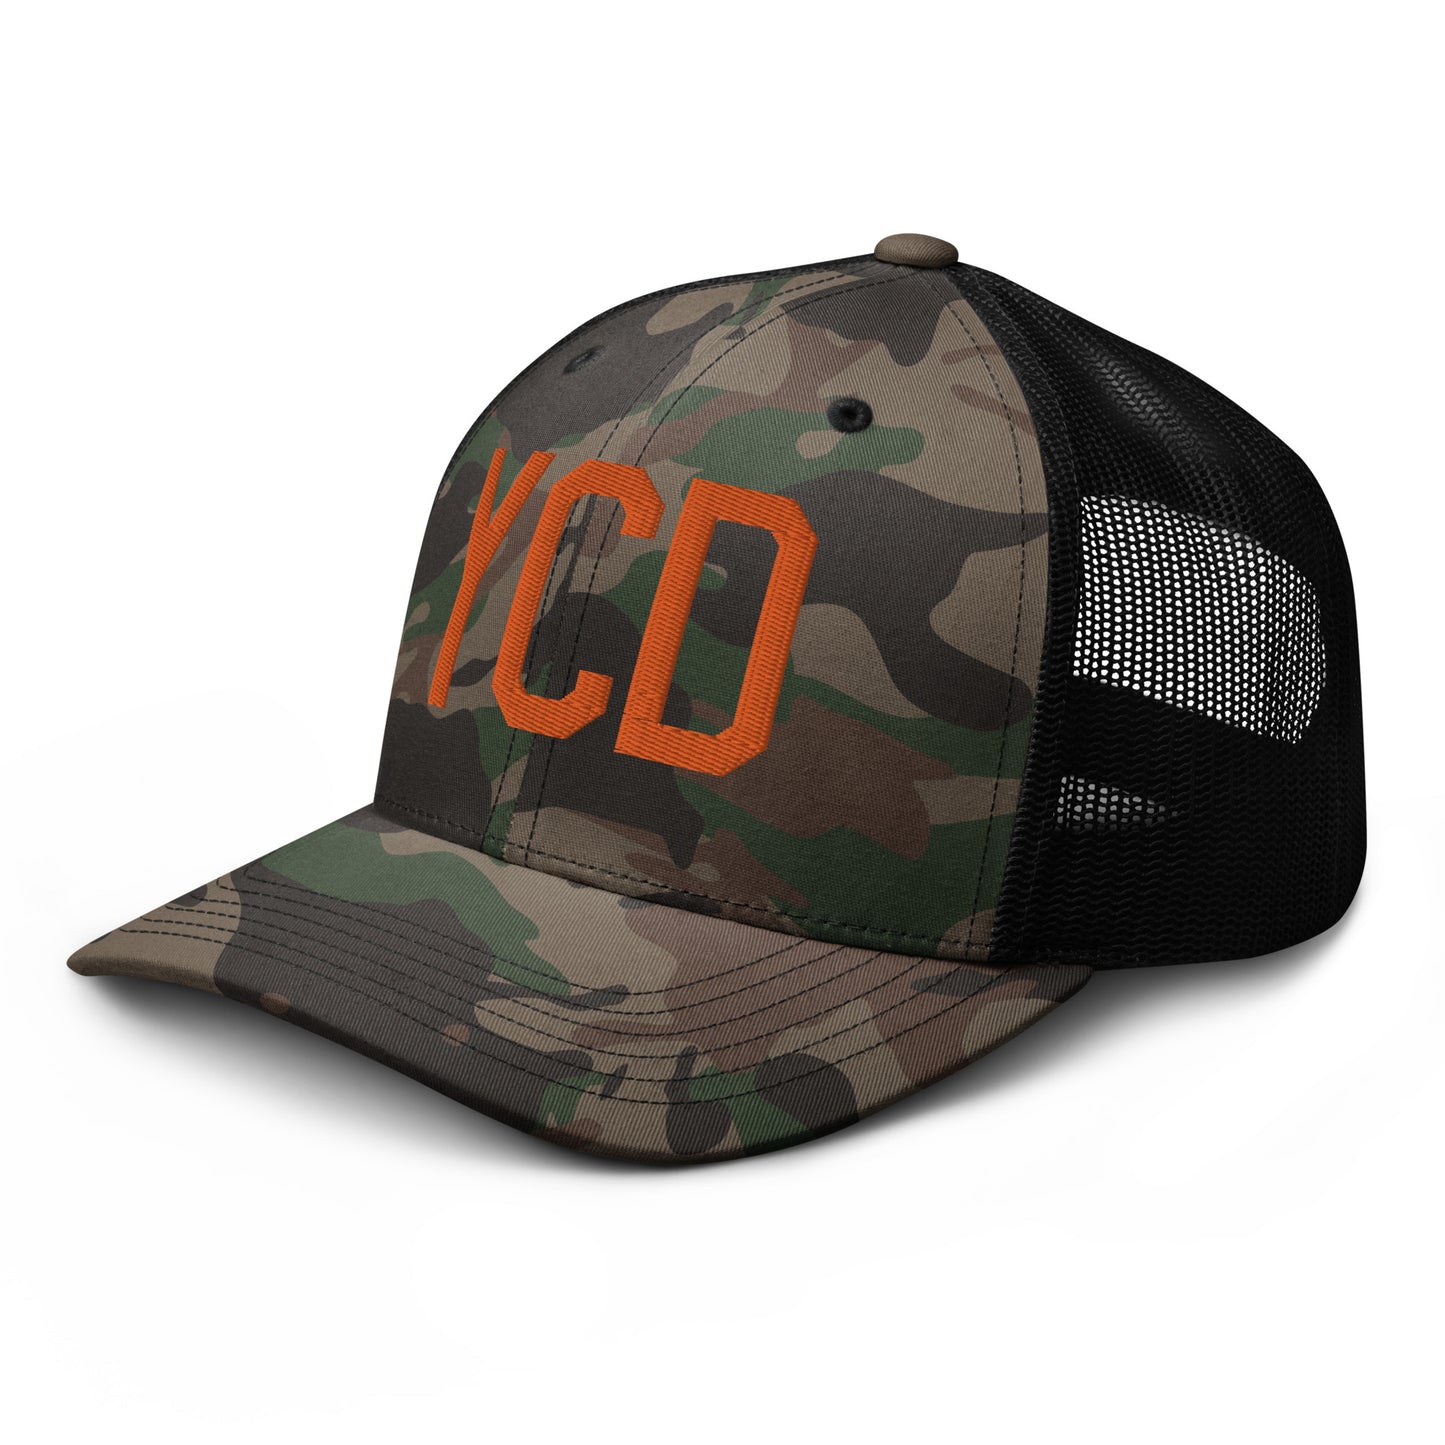 Airport Code Camouflage Trucker Hat - Orange • YCD Nanaimo • YHM Designs - Image 01